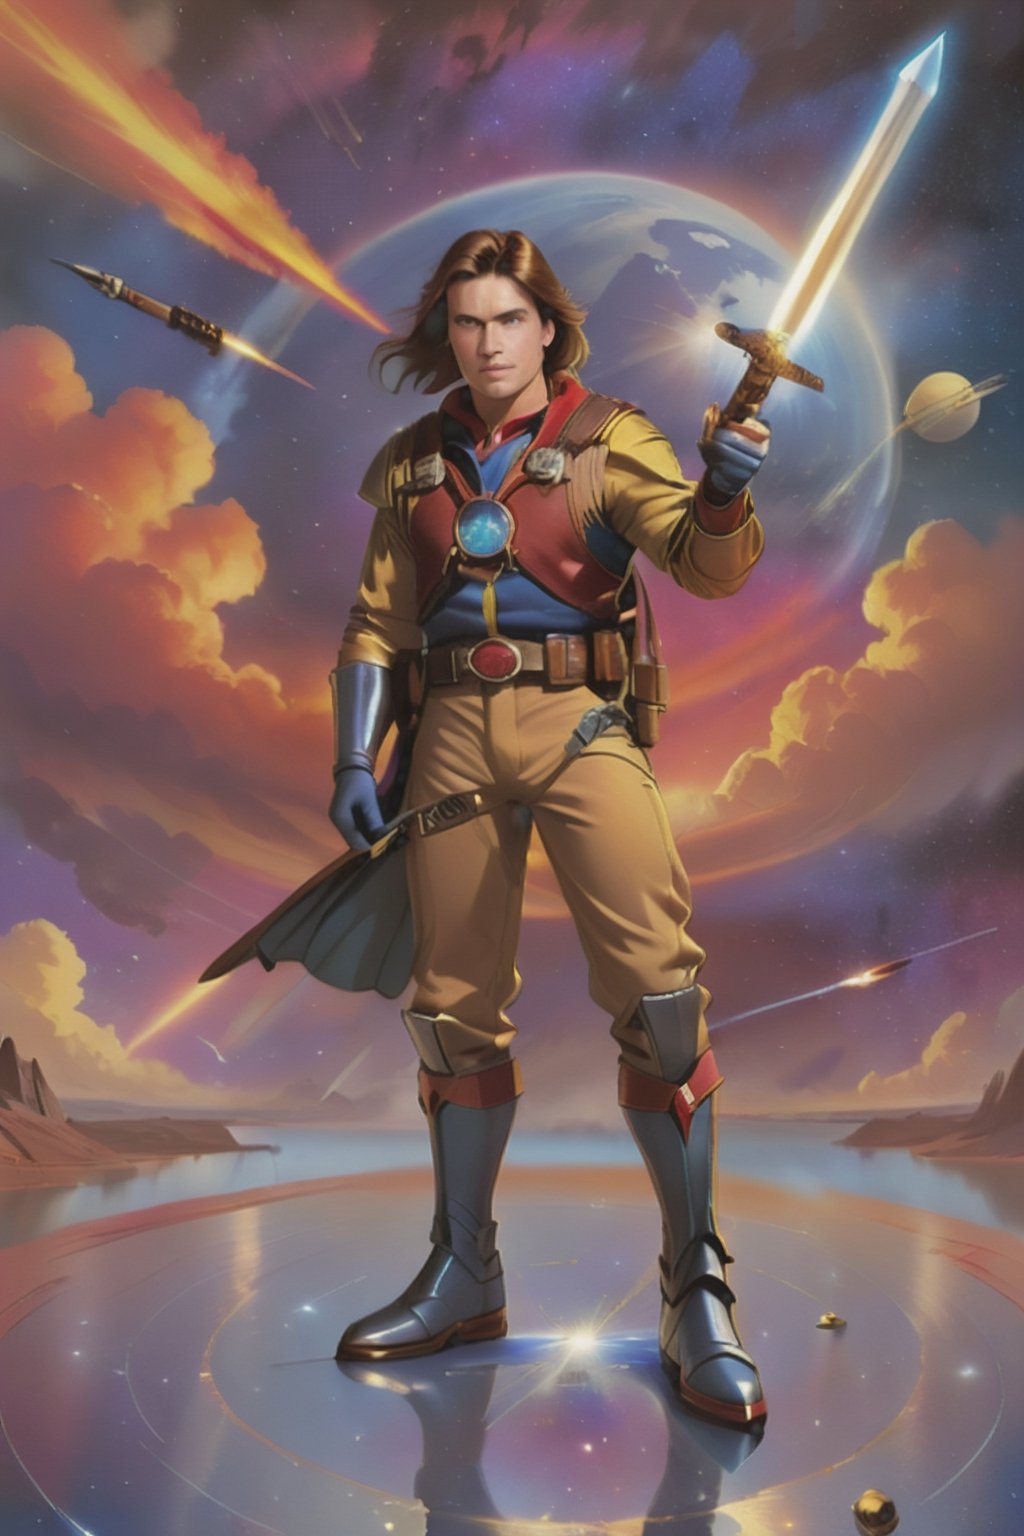 {{potrait of Sam J. Jones dressed a space hero}}, heroic pose, {{holding space sword}}, rocket ships, {{red and yellow clouded sky background}},High detailed ,EpicArt,Color magic,DonMG414 ,HZ Steampunk,Sci-fi 